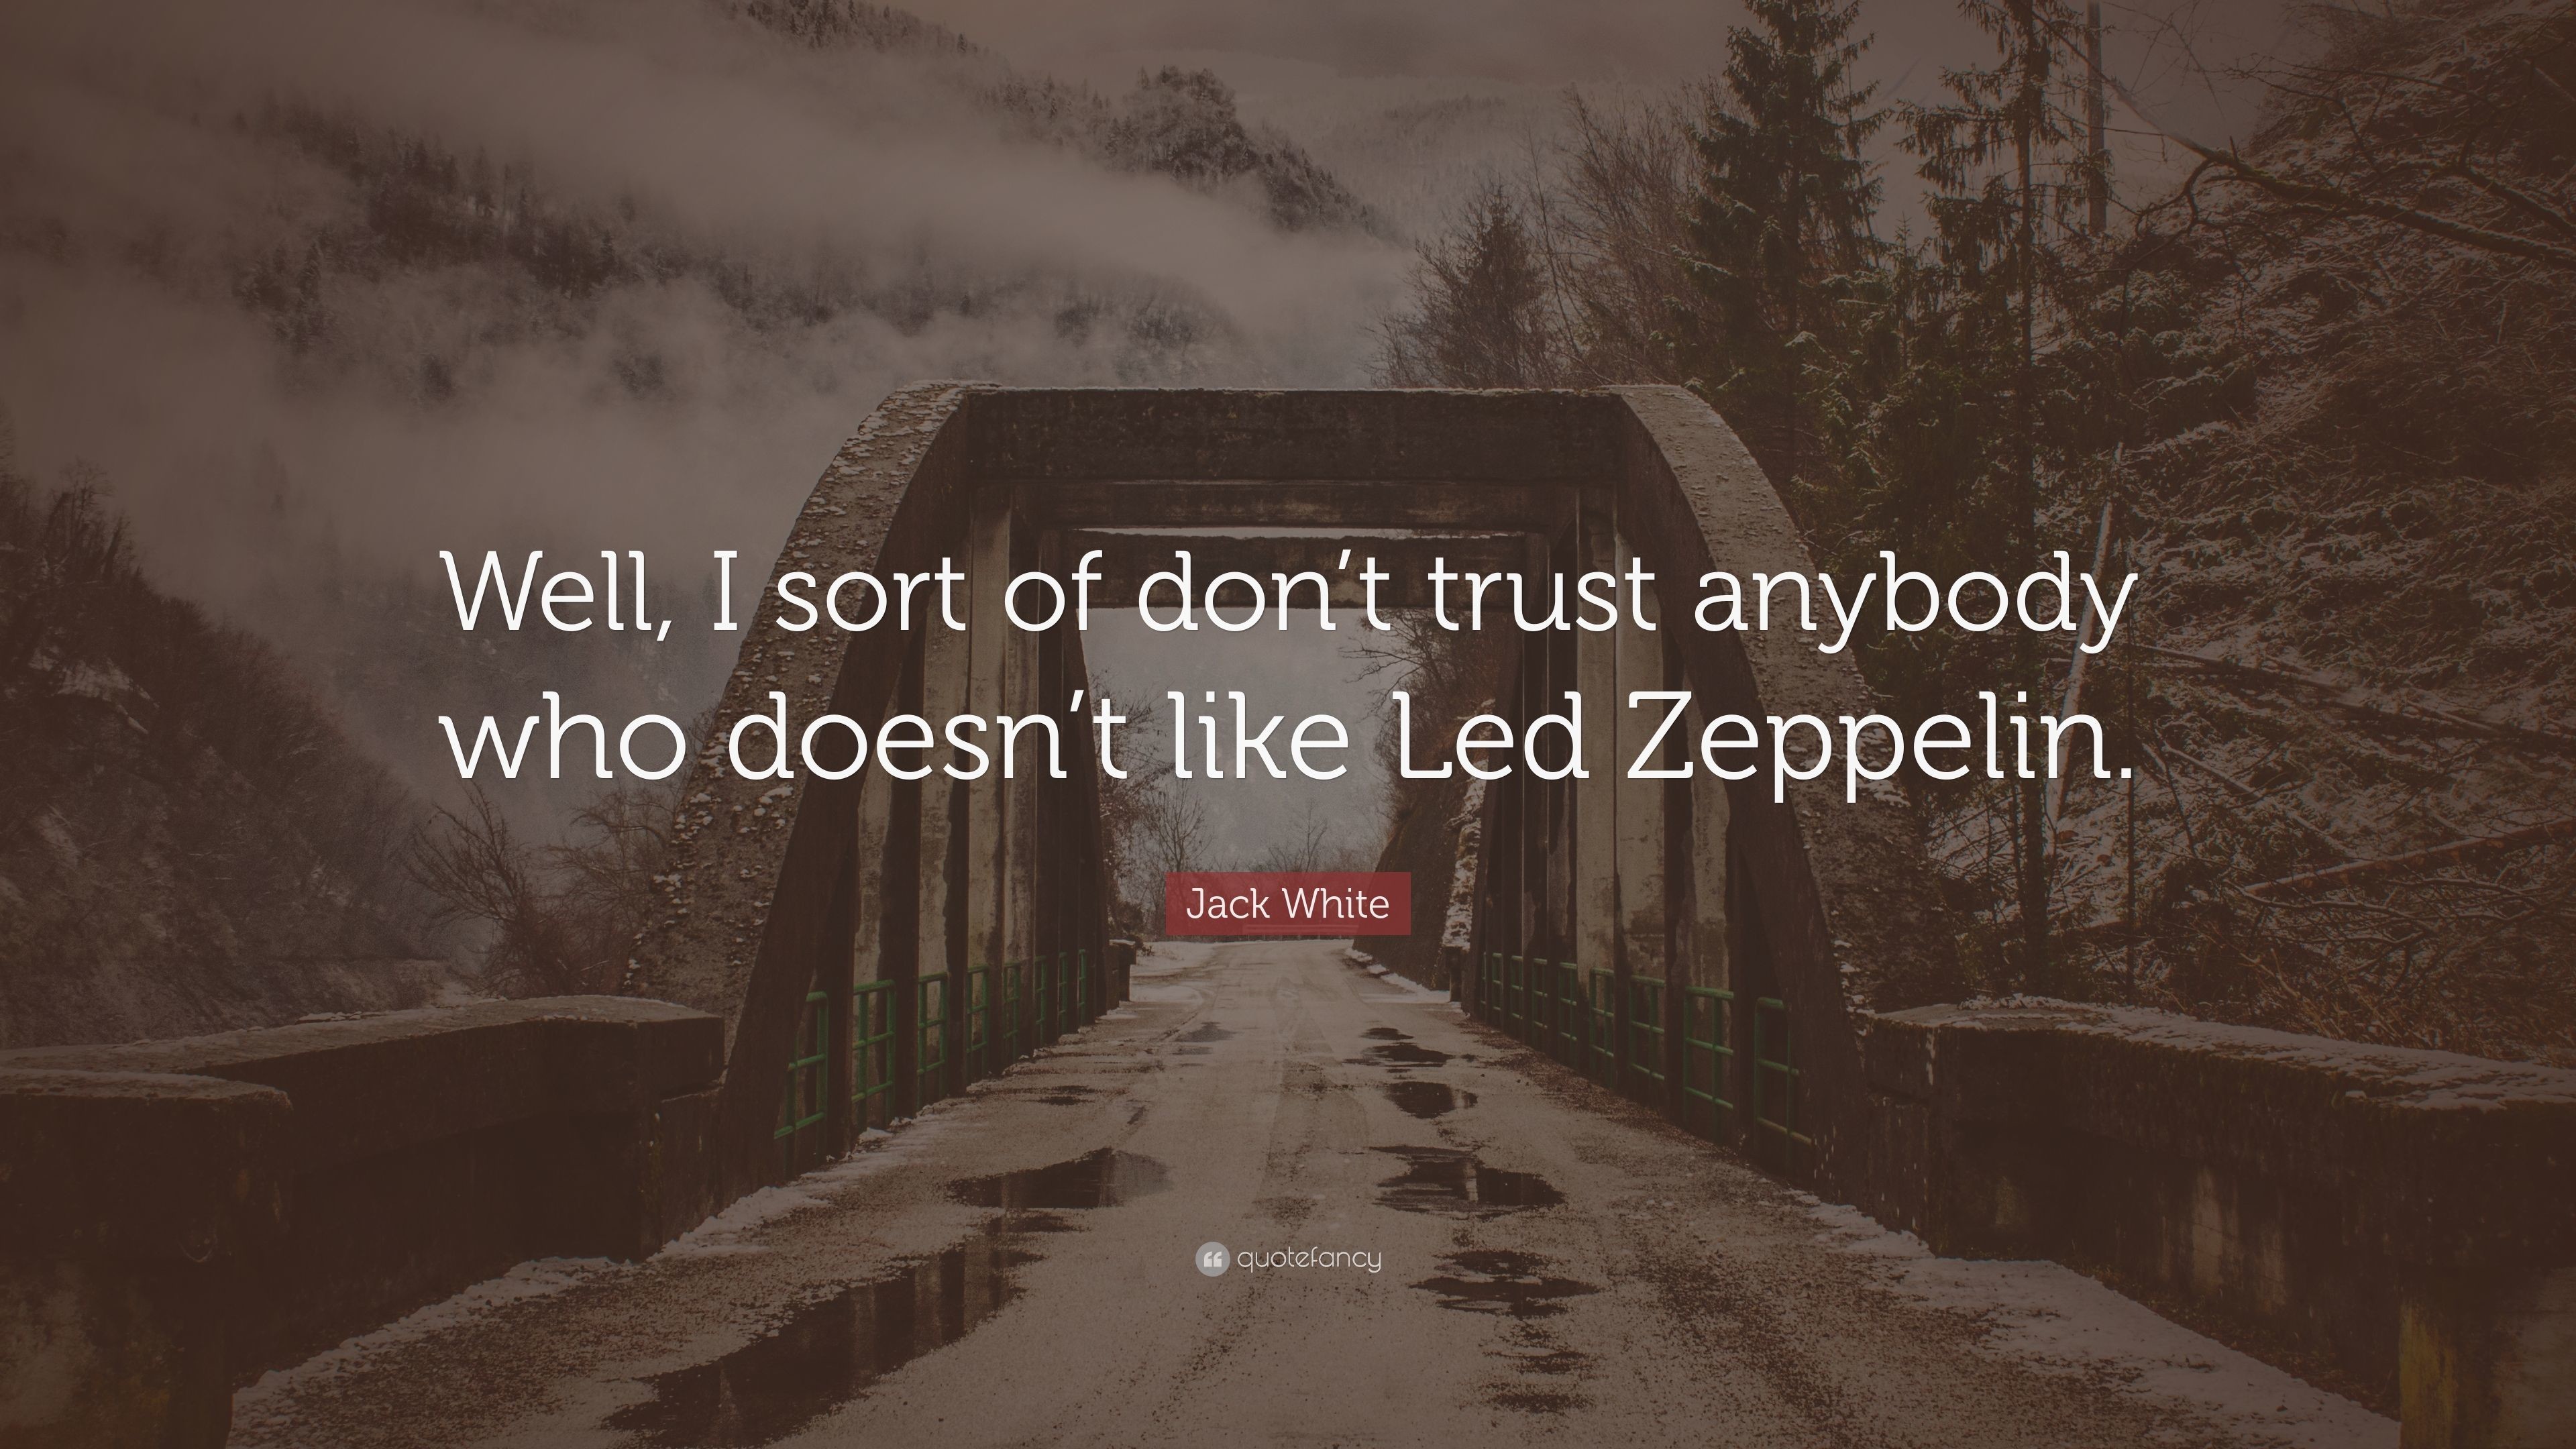 3840x2160 Jack White Quote: “Well, I sort of don't trust anybody who